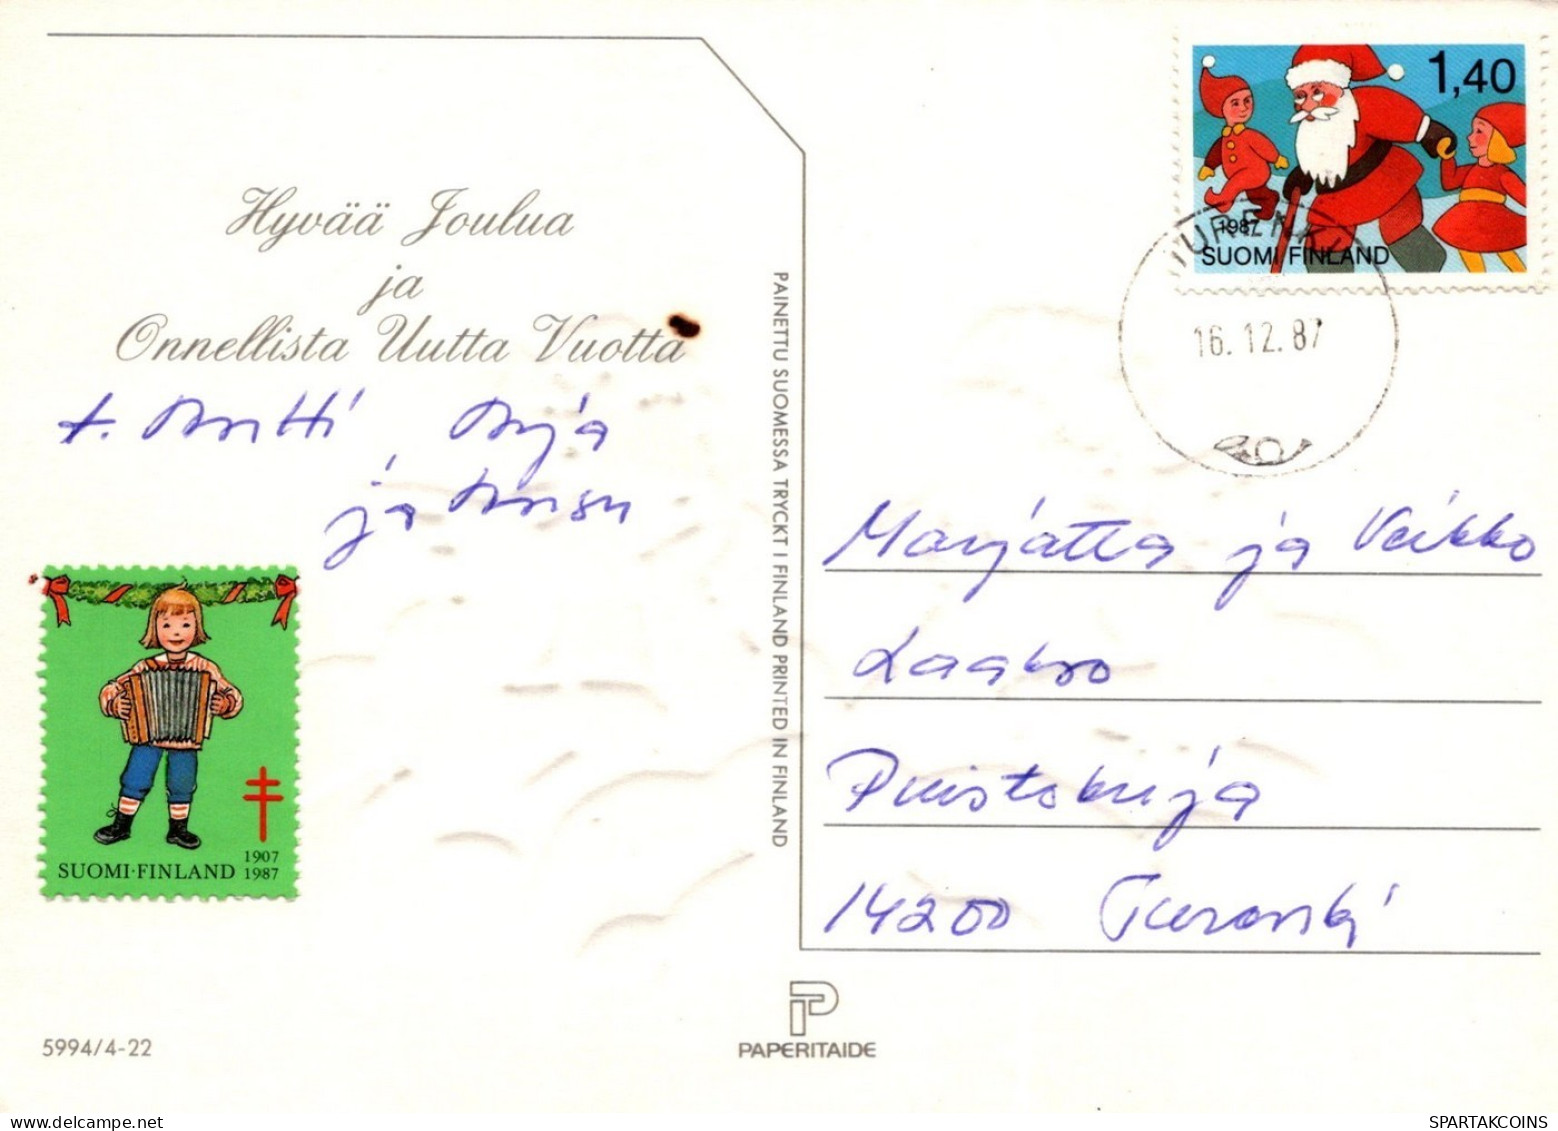 ANGELO Buon Anno Natale Vintage Cartolina CPSM #PAH031.A - Angels